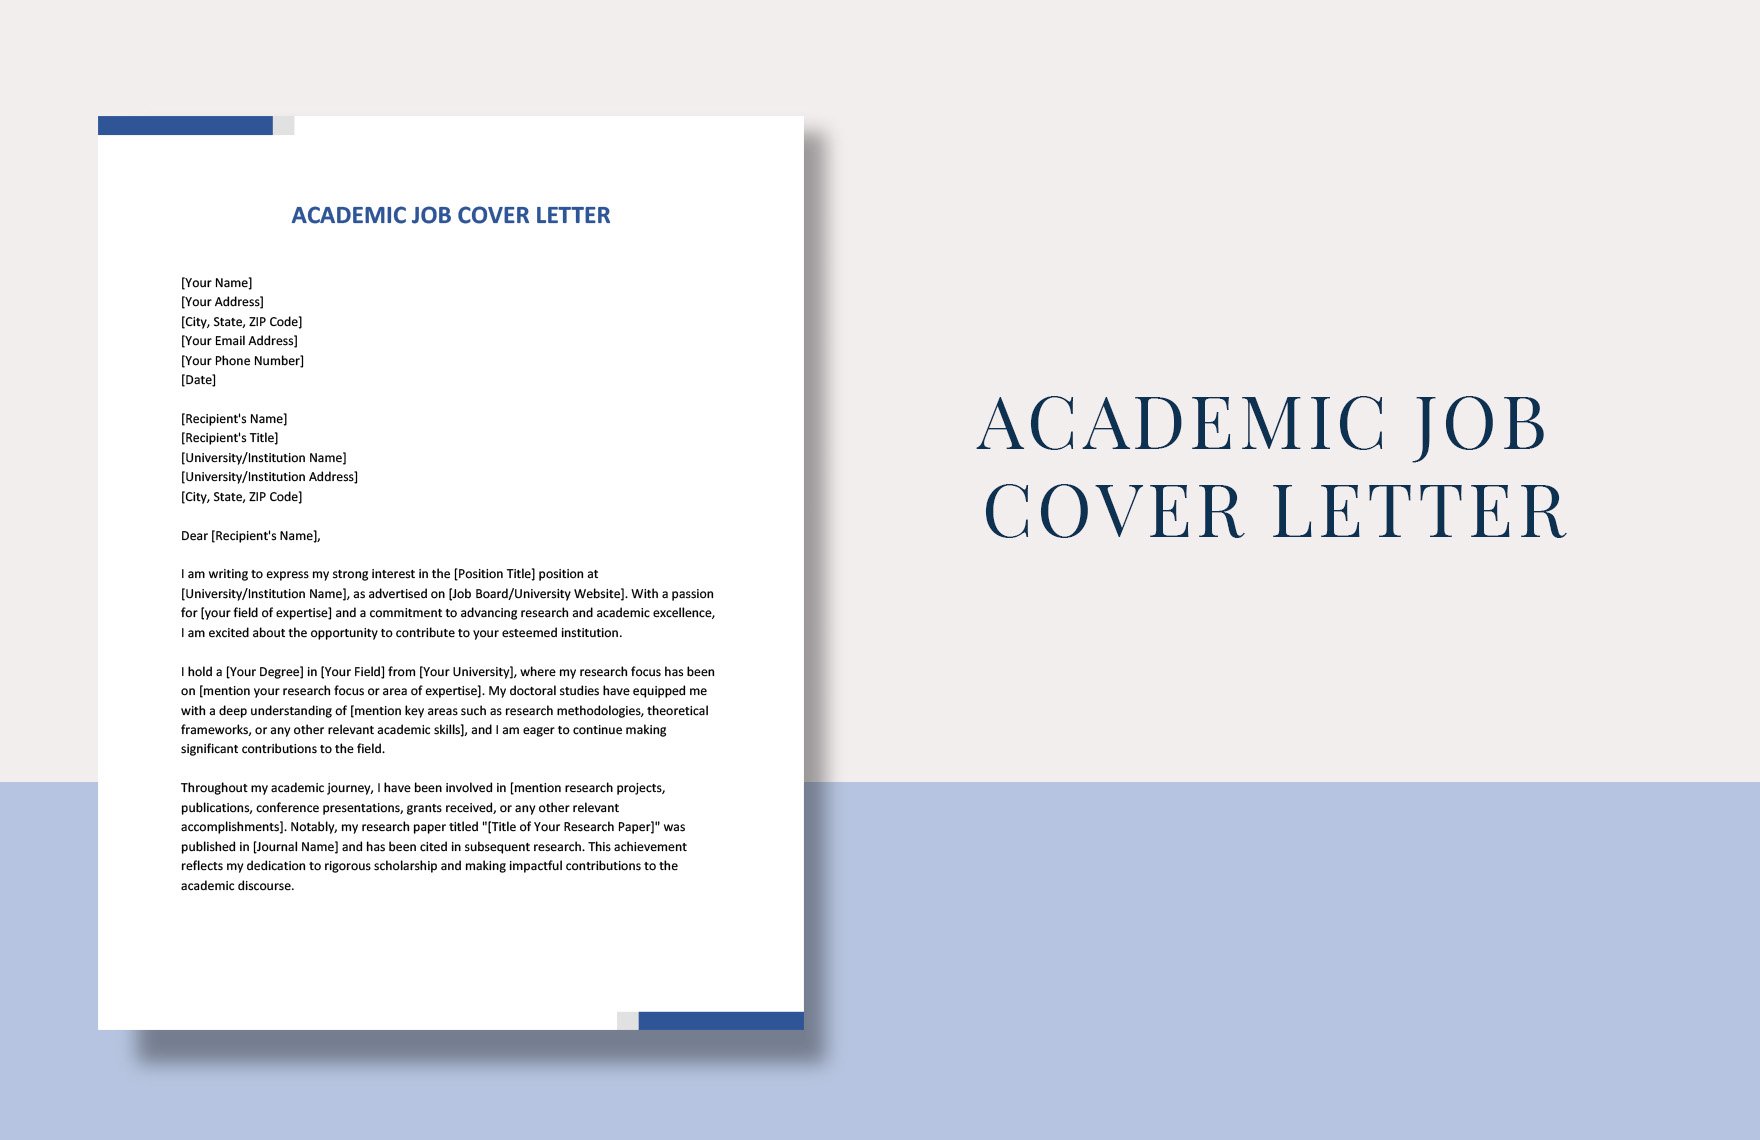 Academic Job Cover Letter in Word, Google Docs